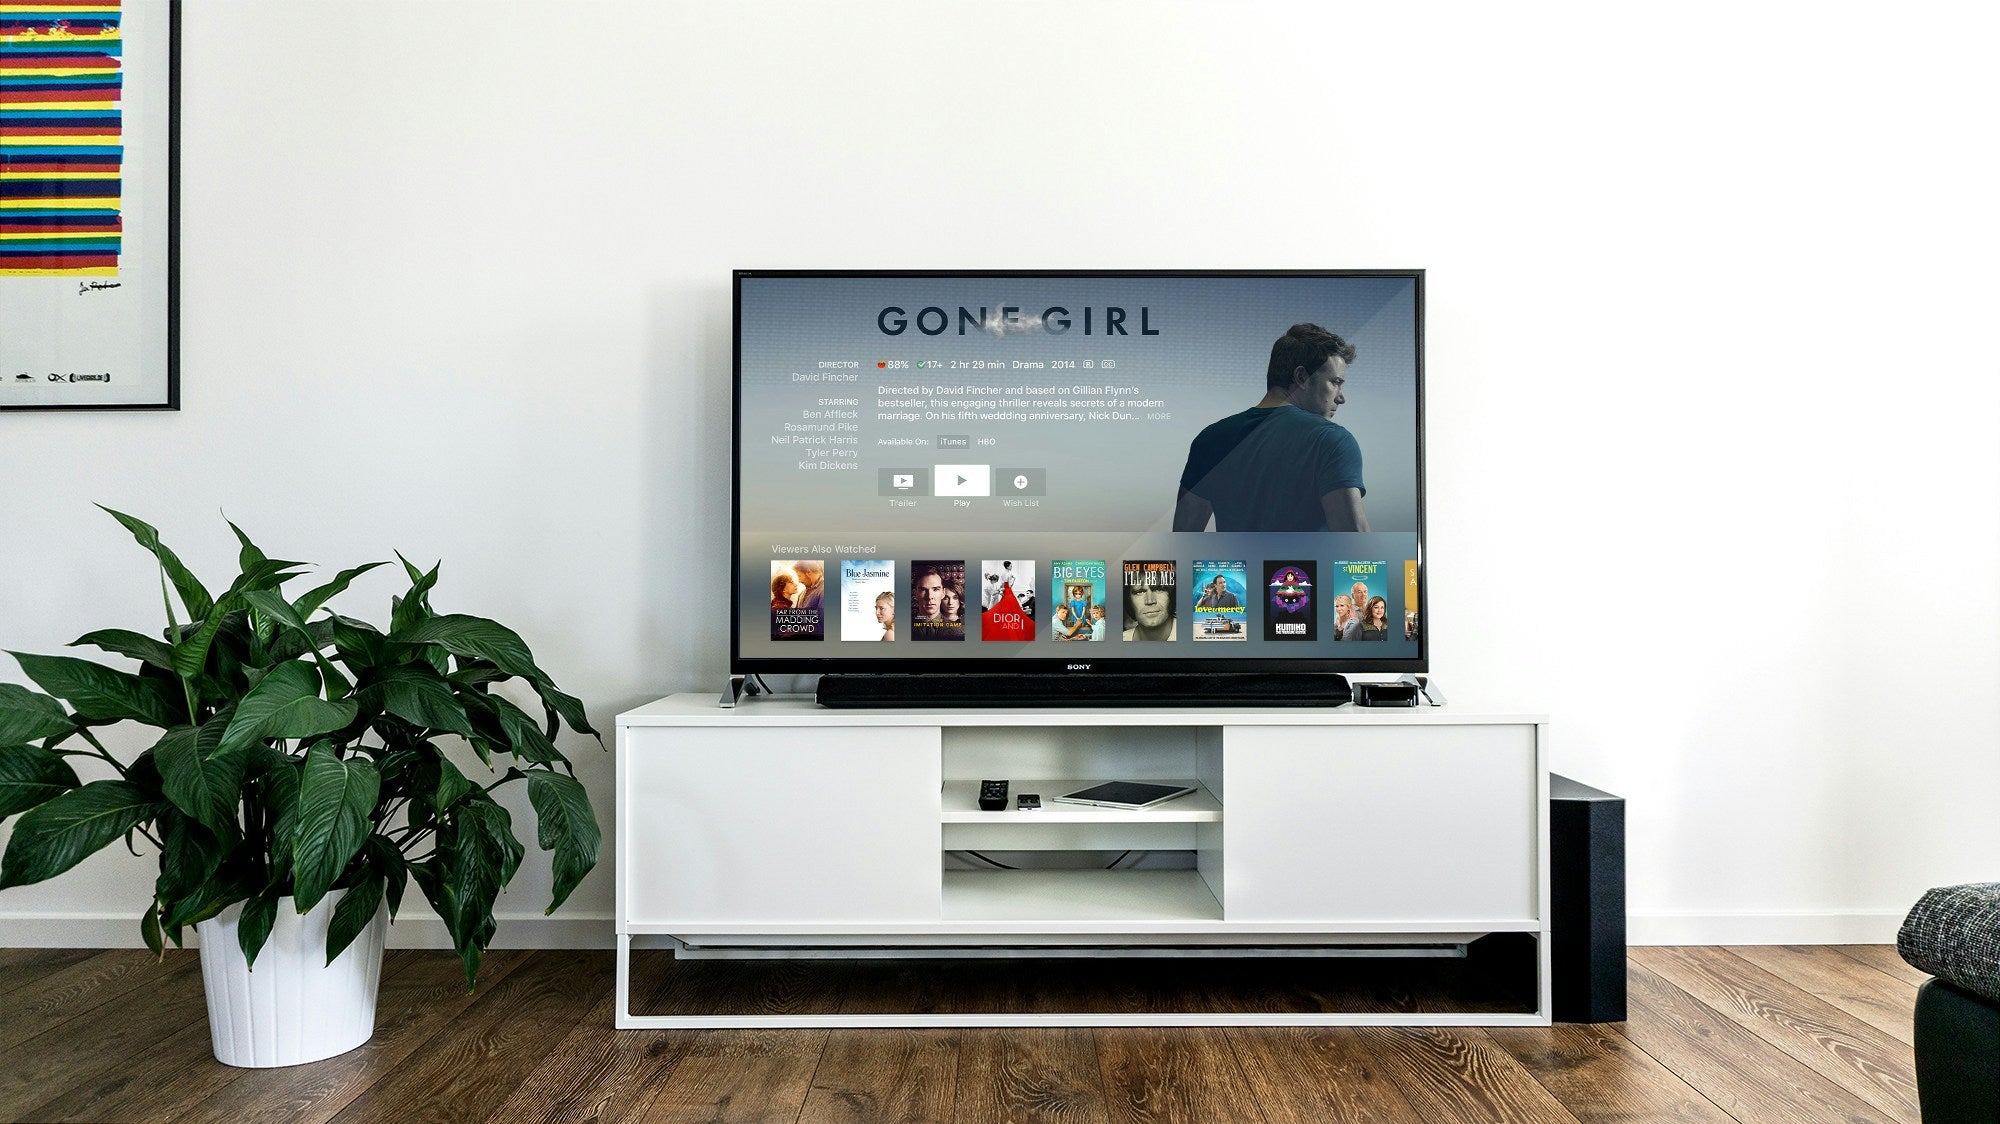 Advice For Freshening Up A Home Media Space